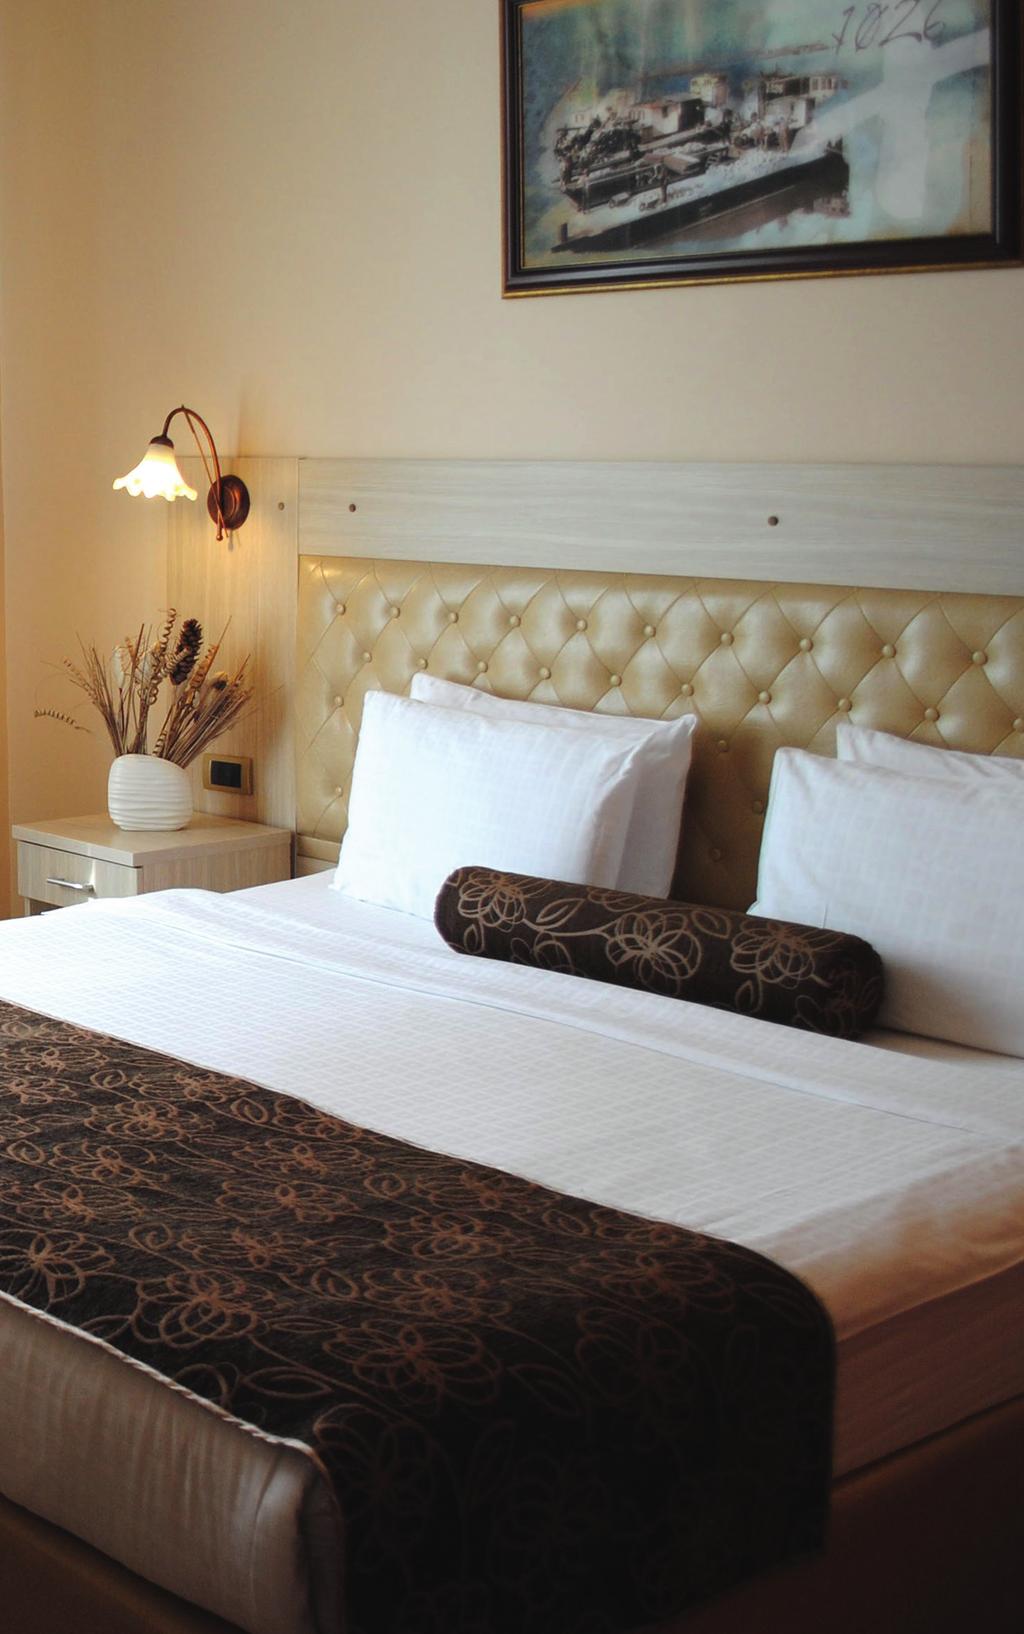 with 4 star rooms, providing a range of treatments to help you feel comfortable.